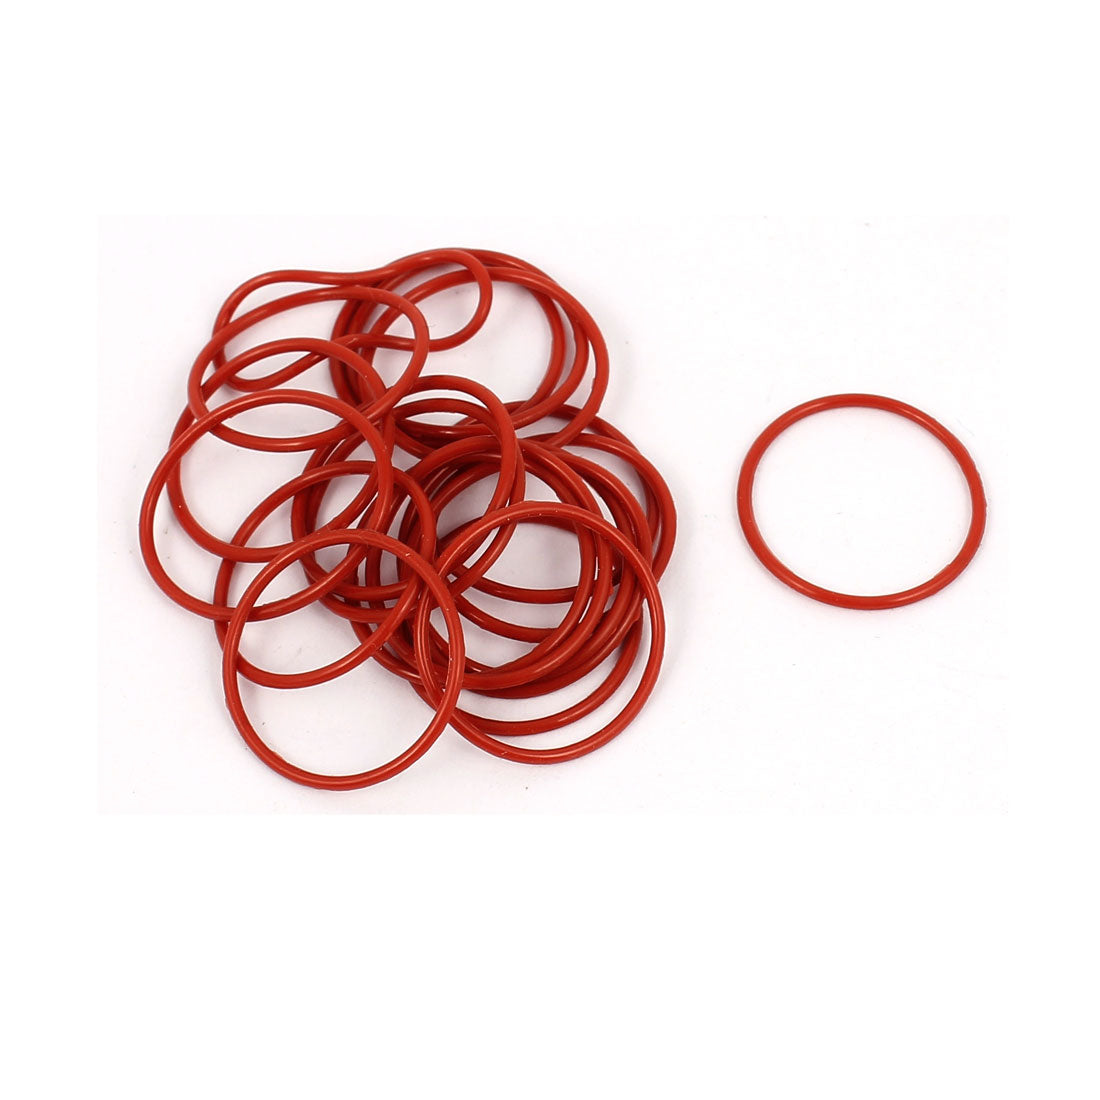 uxcell Uxcell 20Pcs 18mm x 1mm Rubber O-rings NBR Heat Resistant Sealing Ring Grommets Red